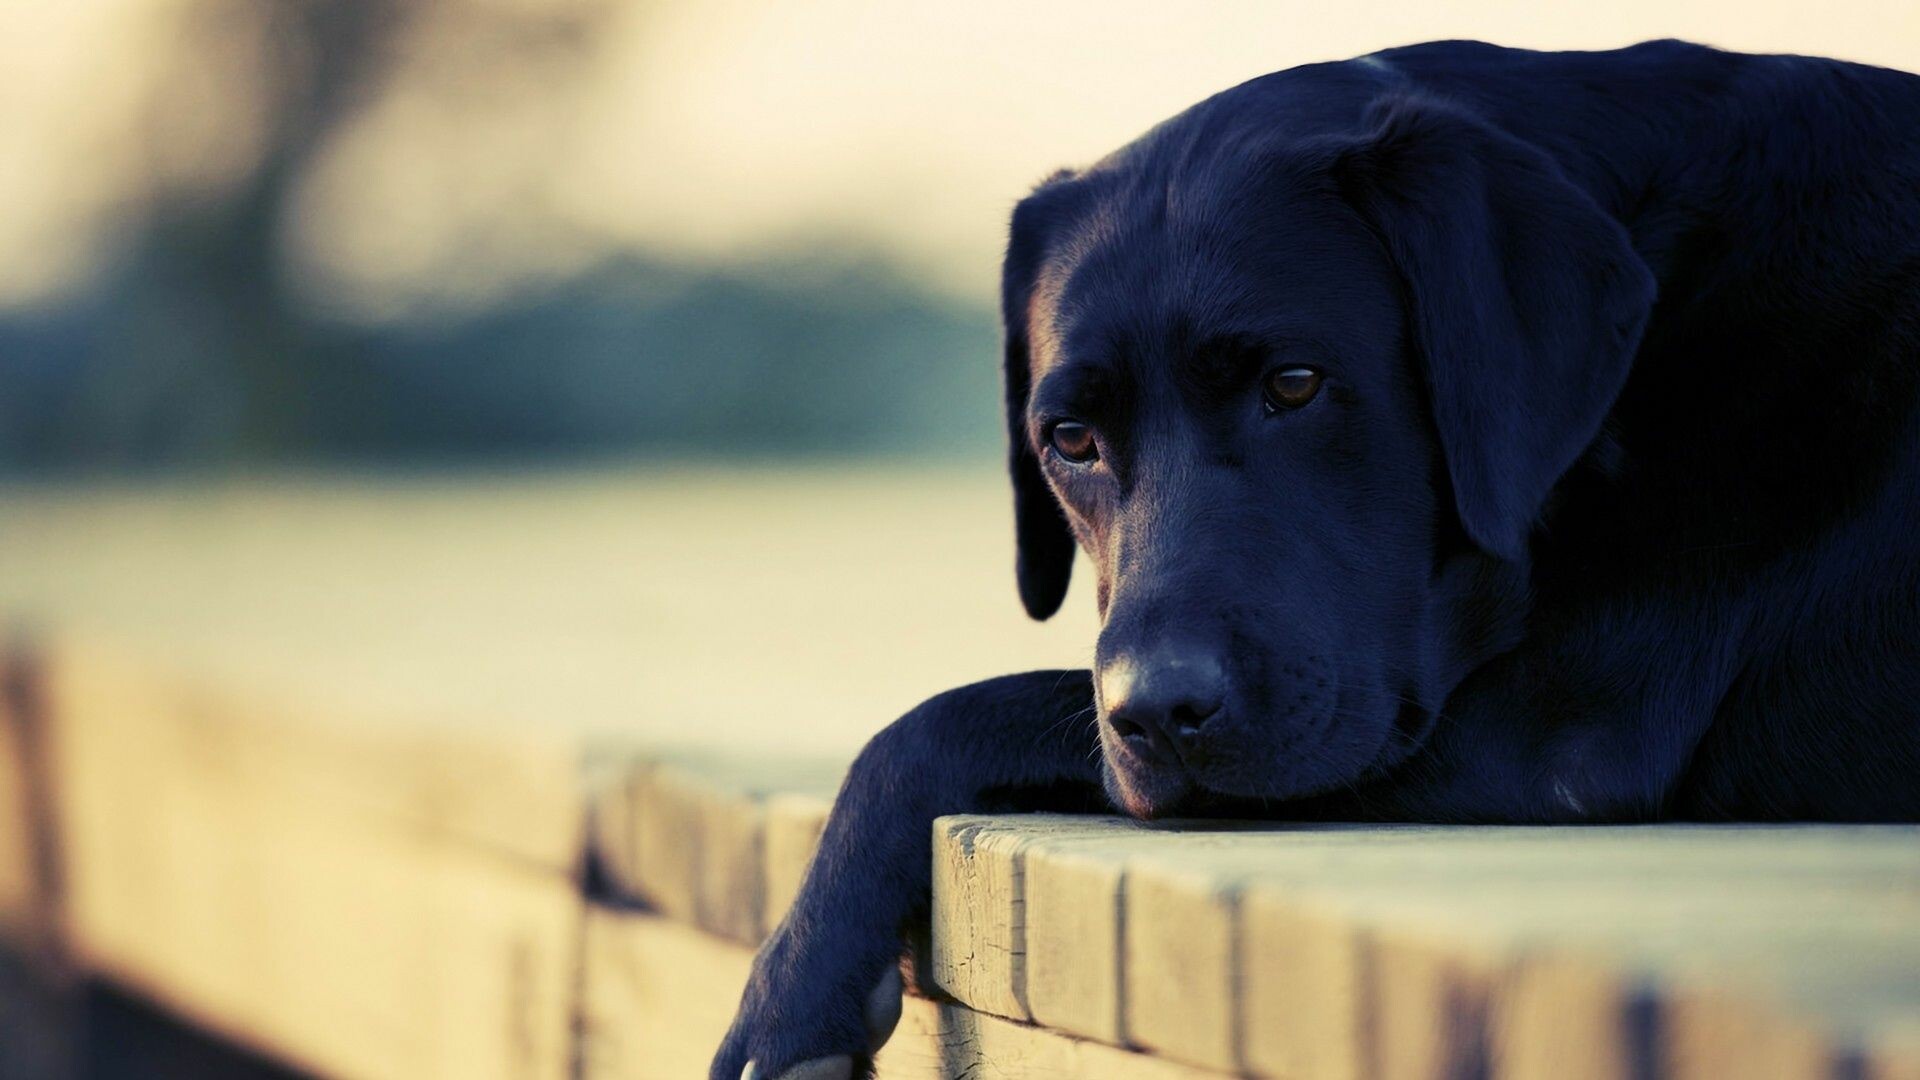 Labrador wallpapers, Perfect for dog lovers, Adorable and friendly, Loyal companions, 1920x1080 Full HD Desktop